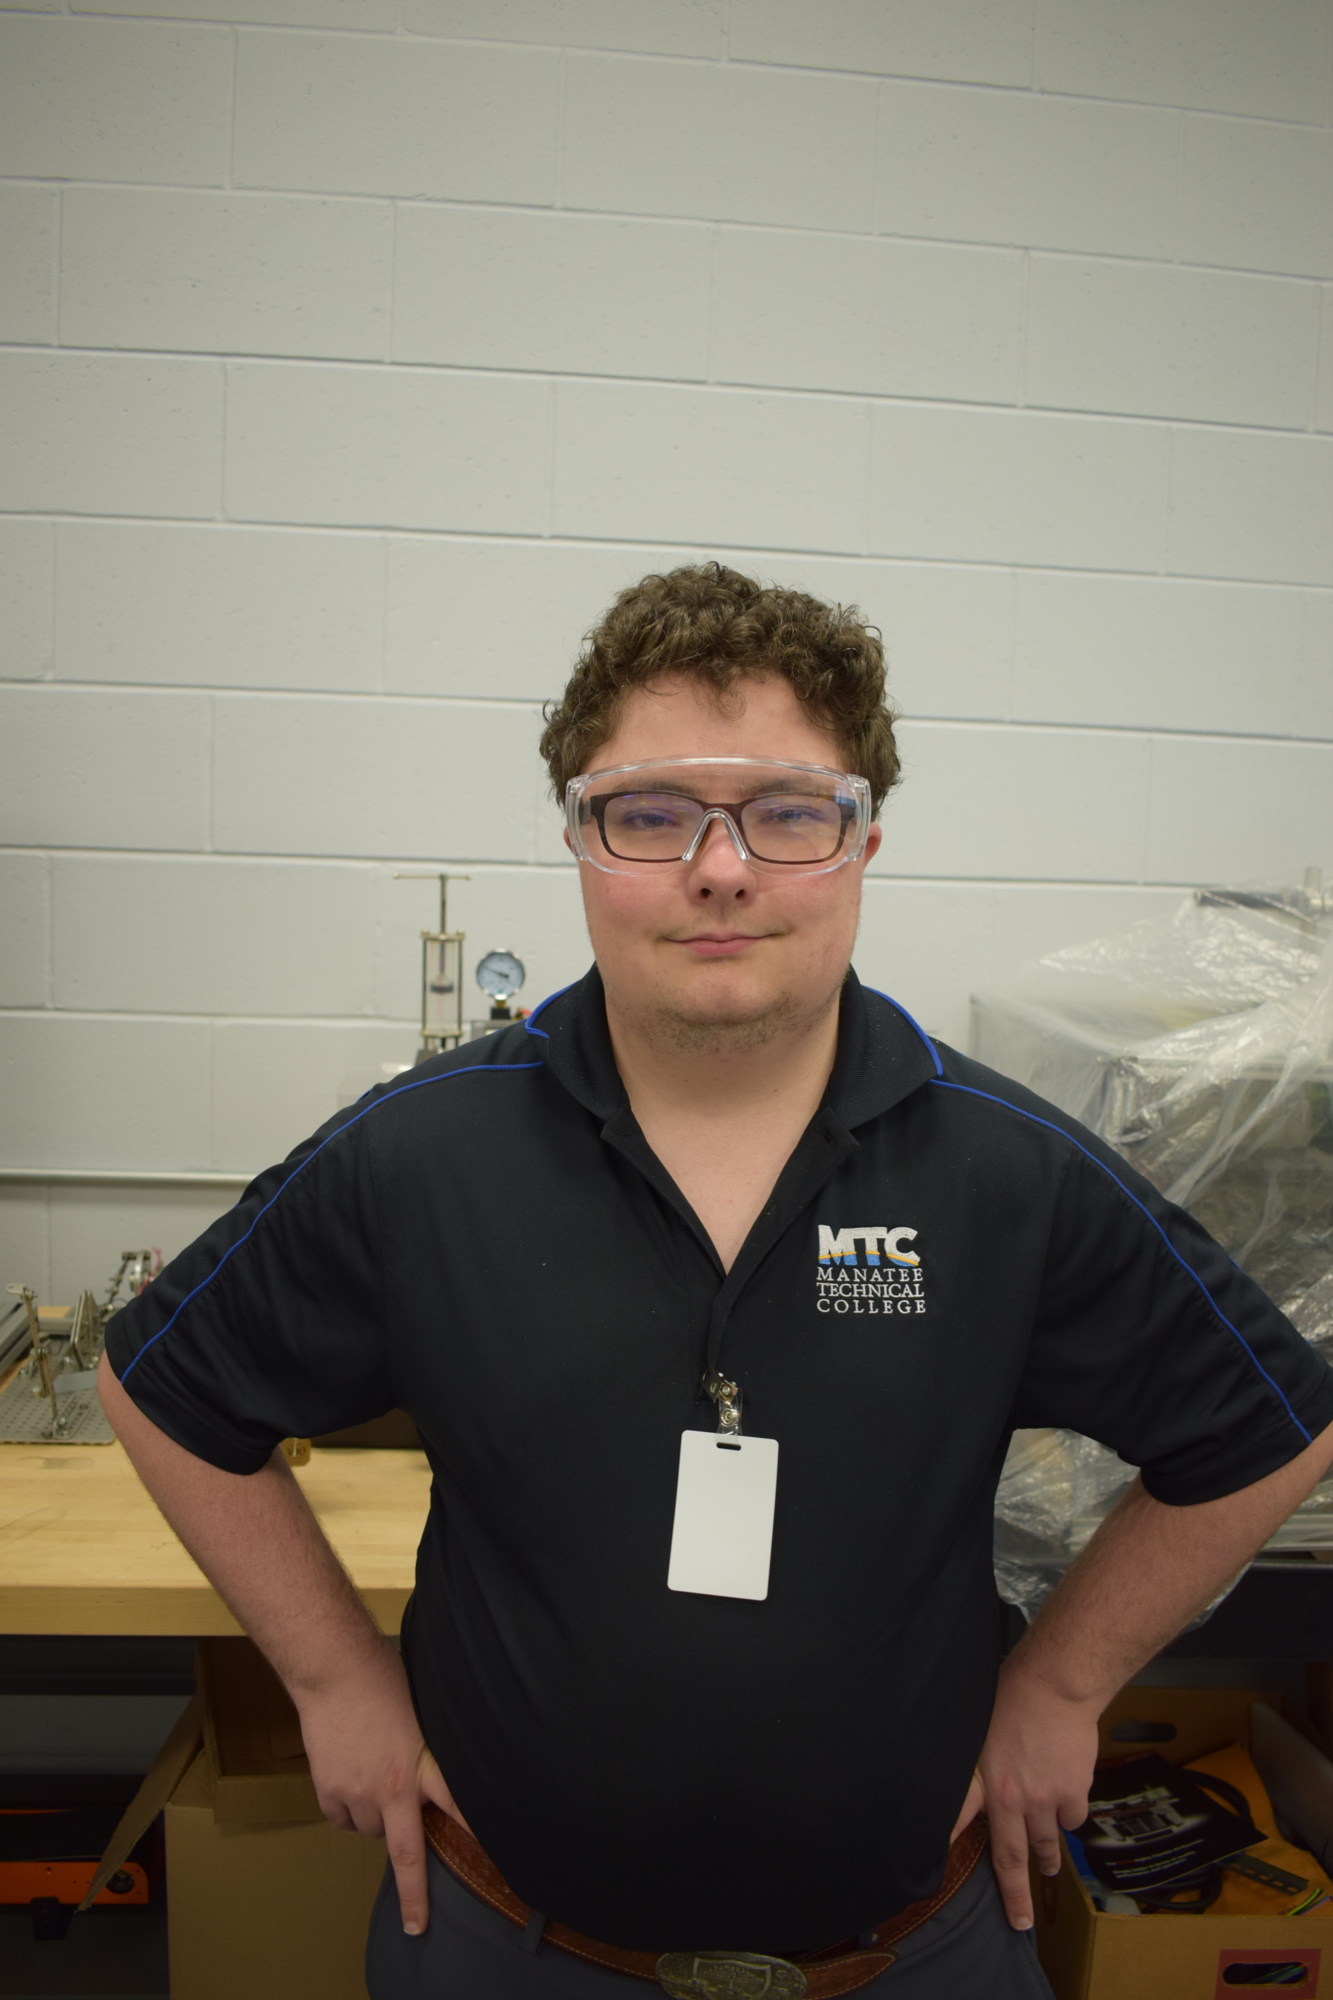 Michael Baillie is a student in the Advanced Manufacturing course.